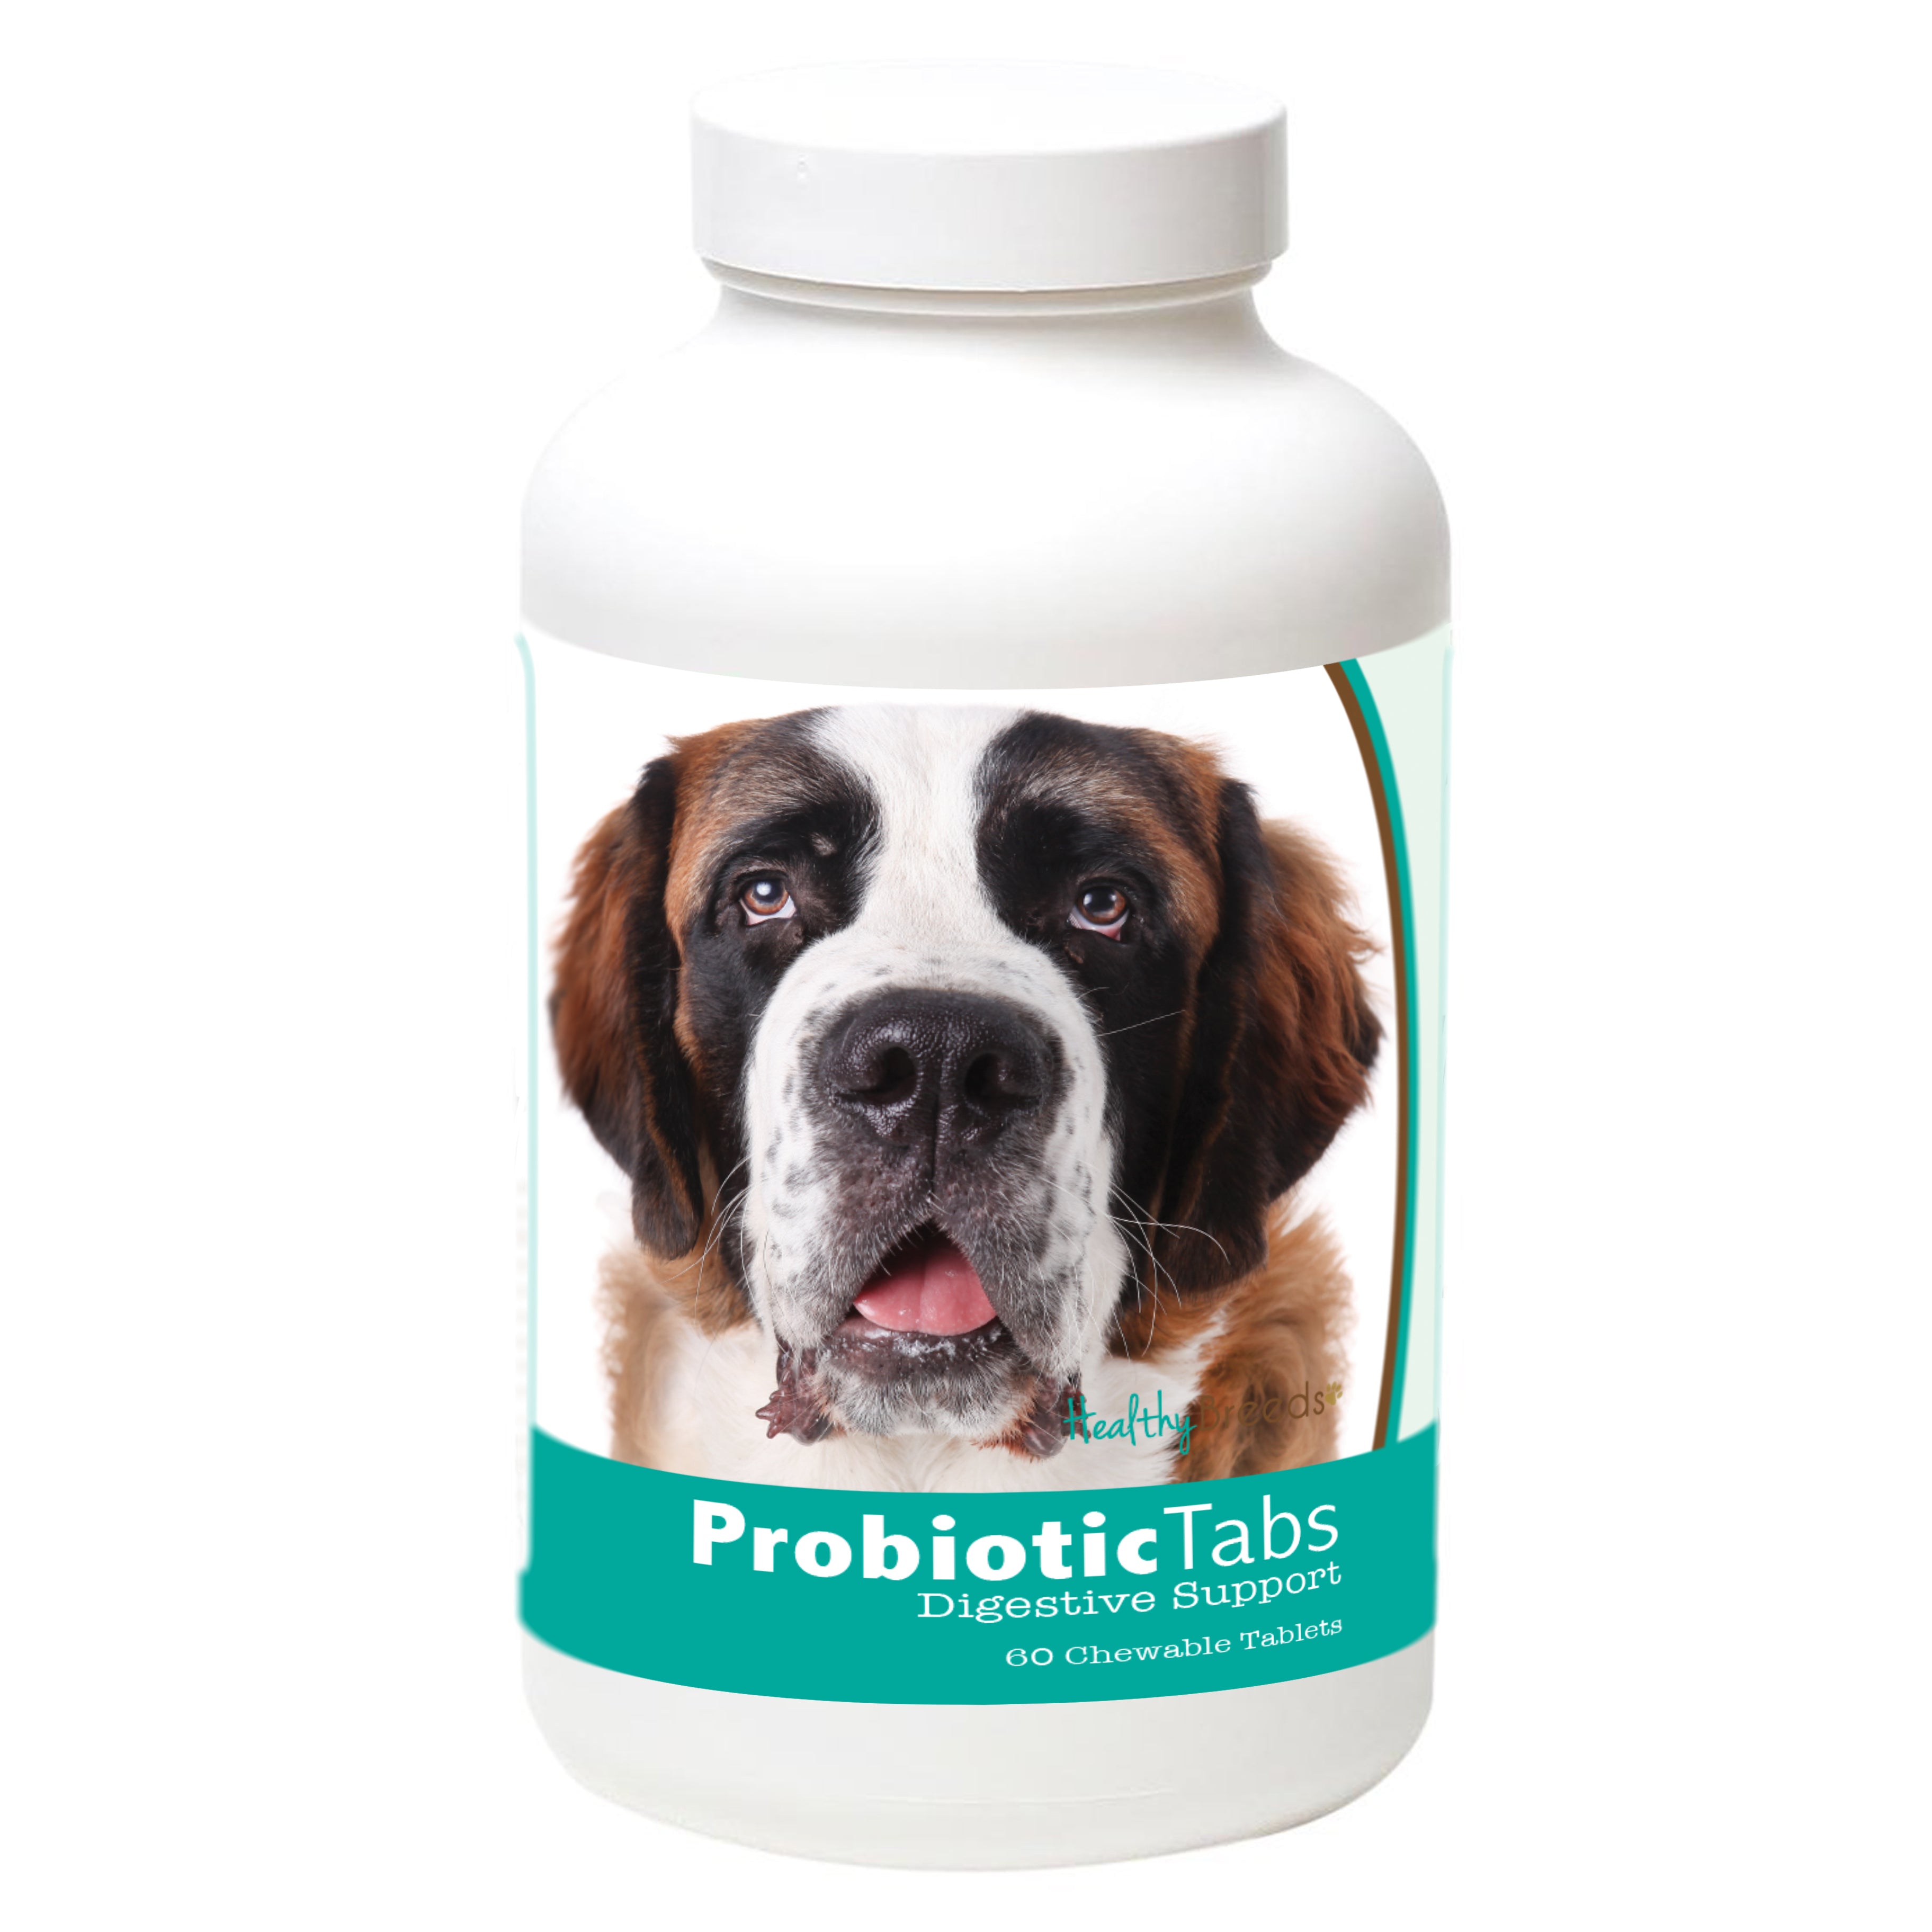 Saint Bernard Probiotic and Digestive Support for Dogs 60 Count